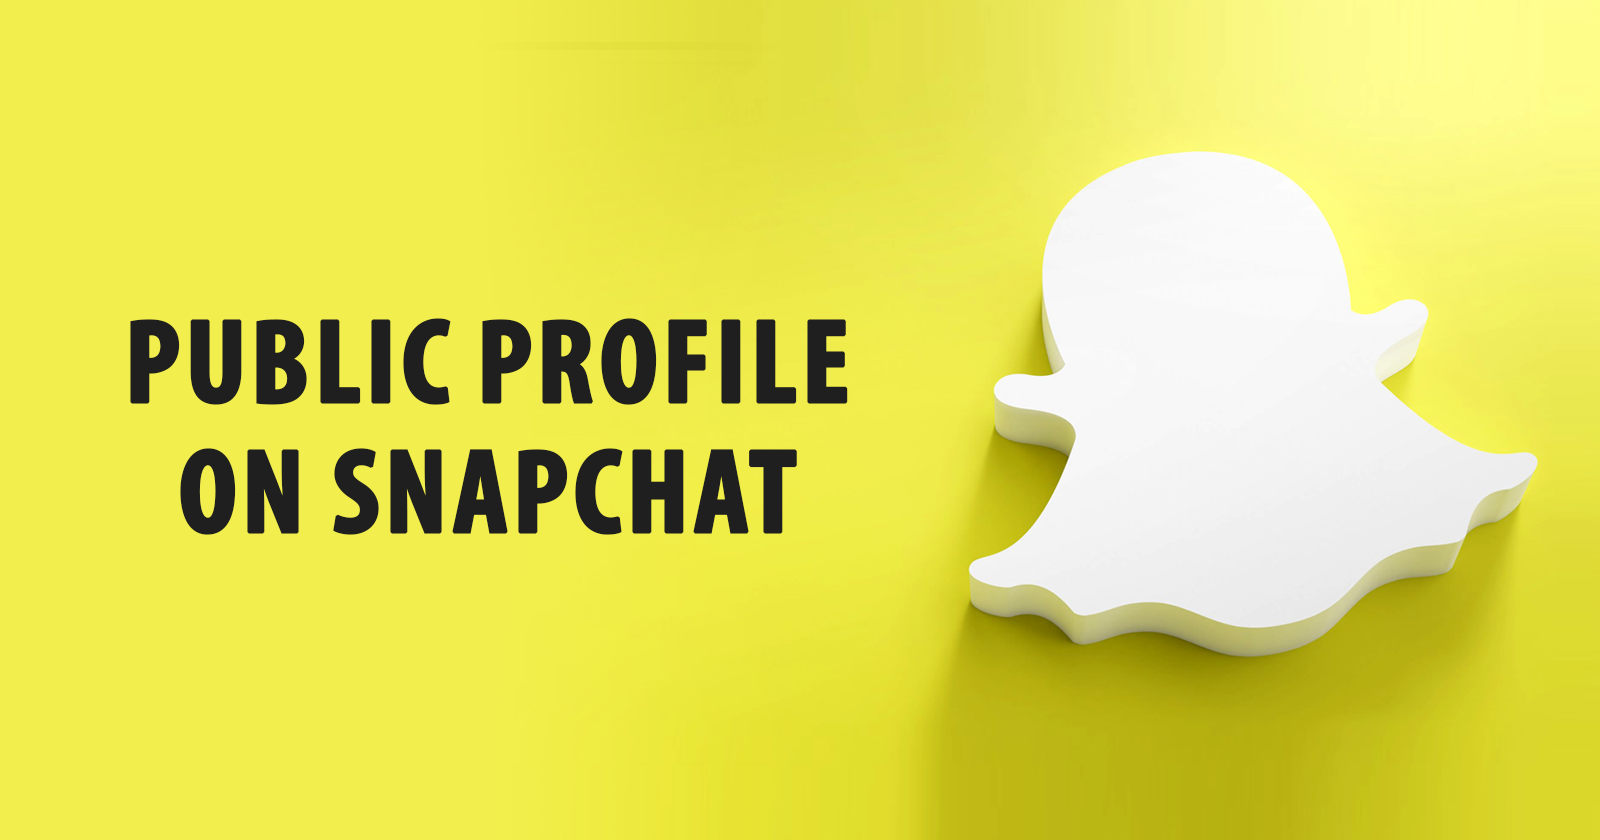 How to Make Public Profile on Snapchat